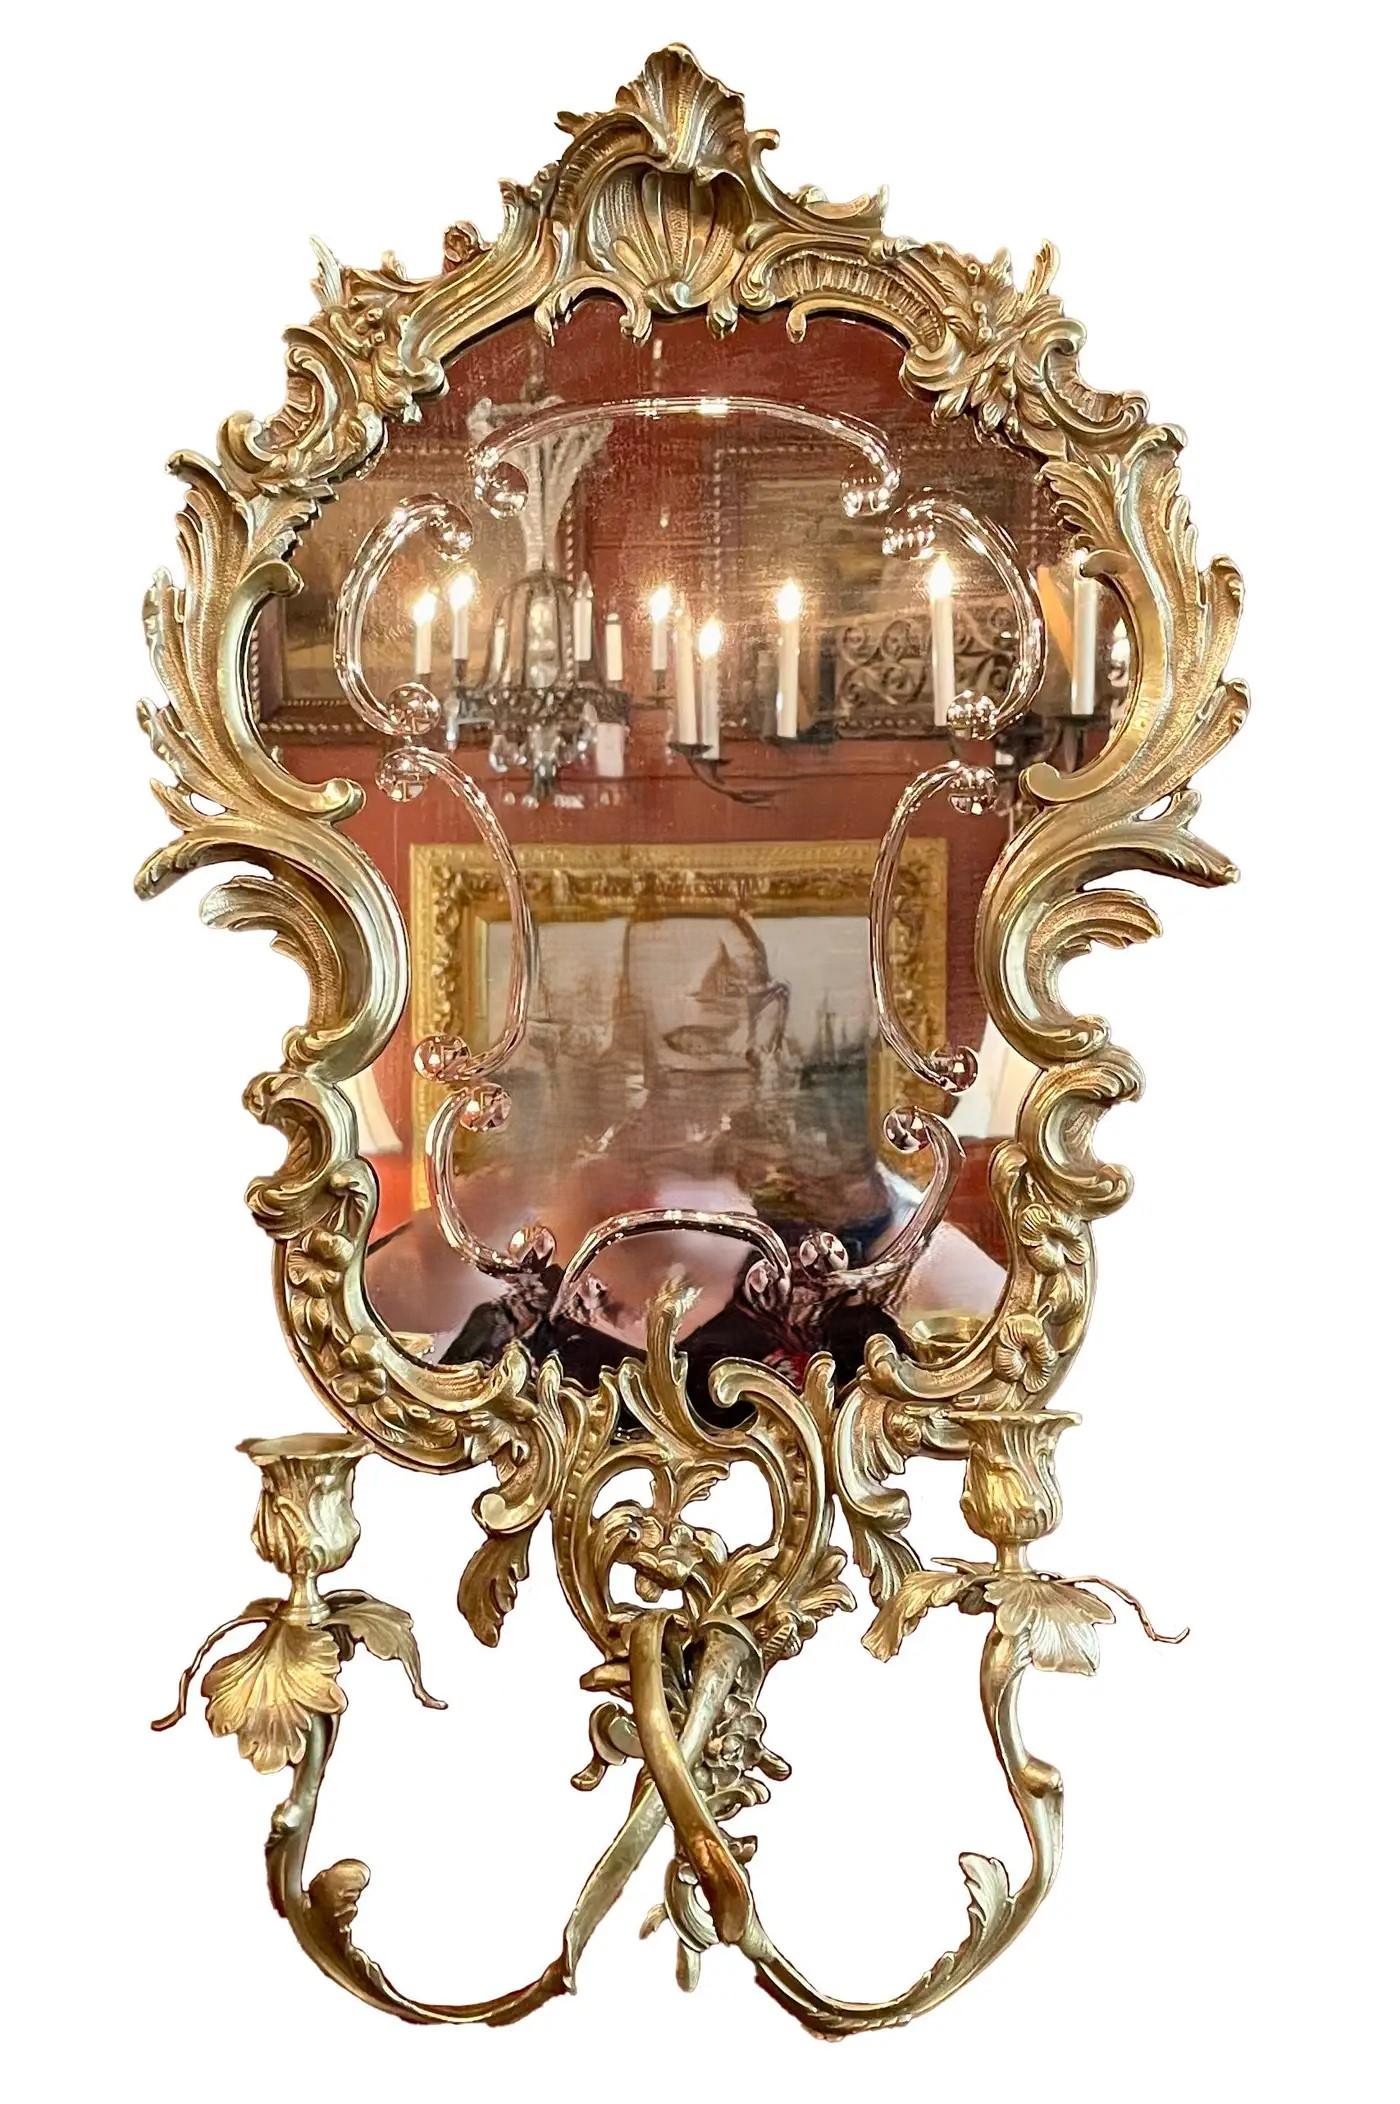 Pair of exceptional antique gold bronze and mirror sconces, circa 1890.
